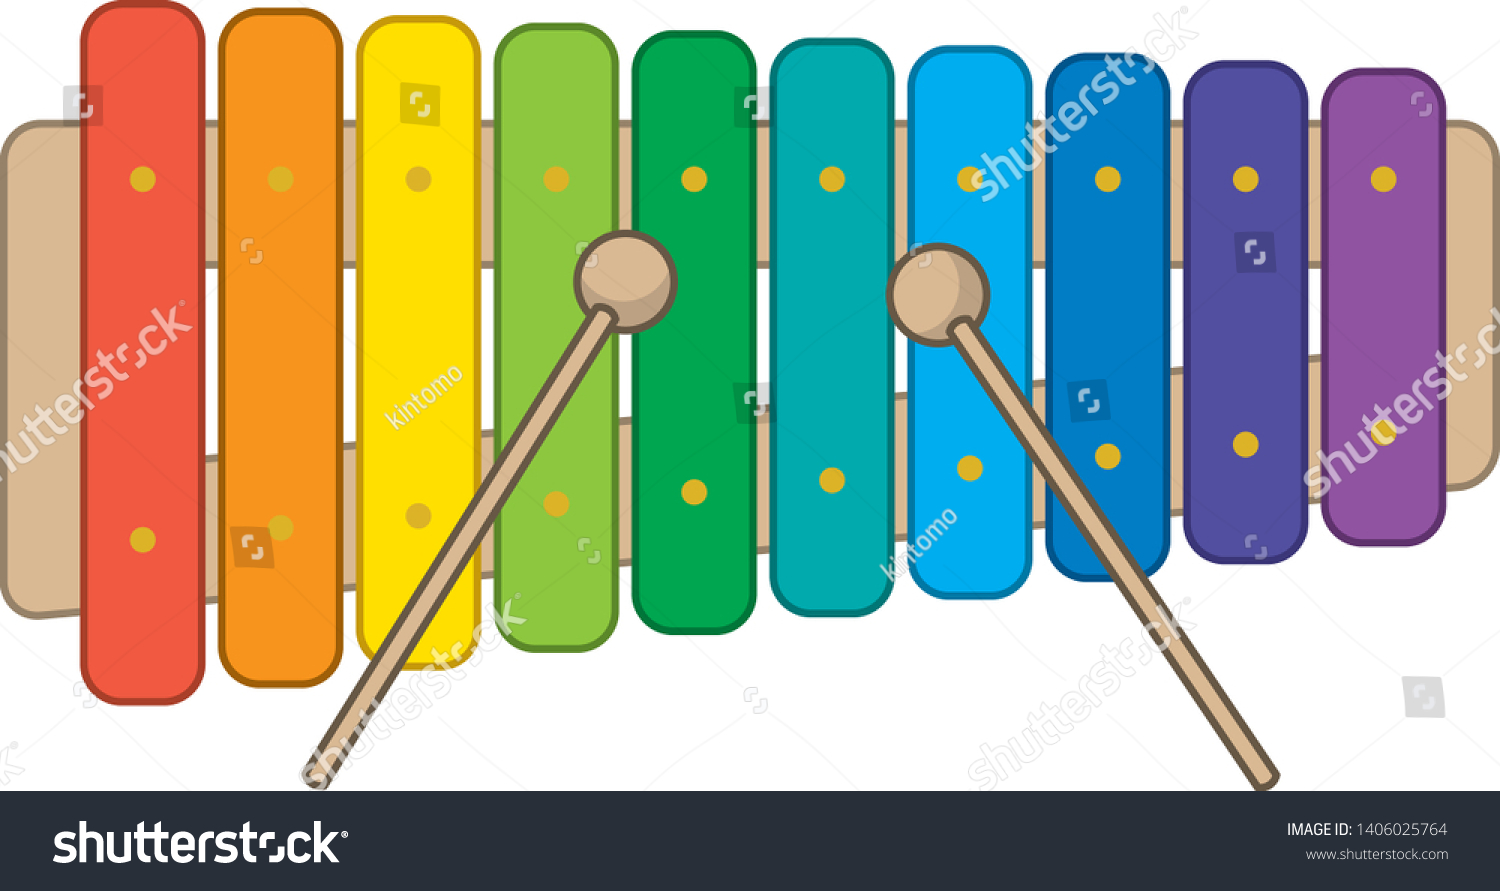 Musical Instrument Image Illustration Colorful Xylophone Stock Vector Royalty Free